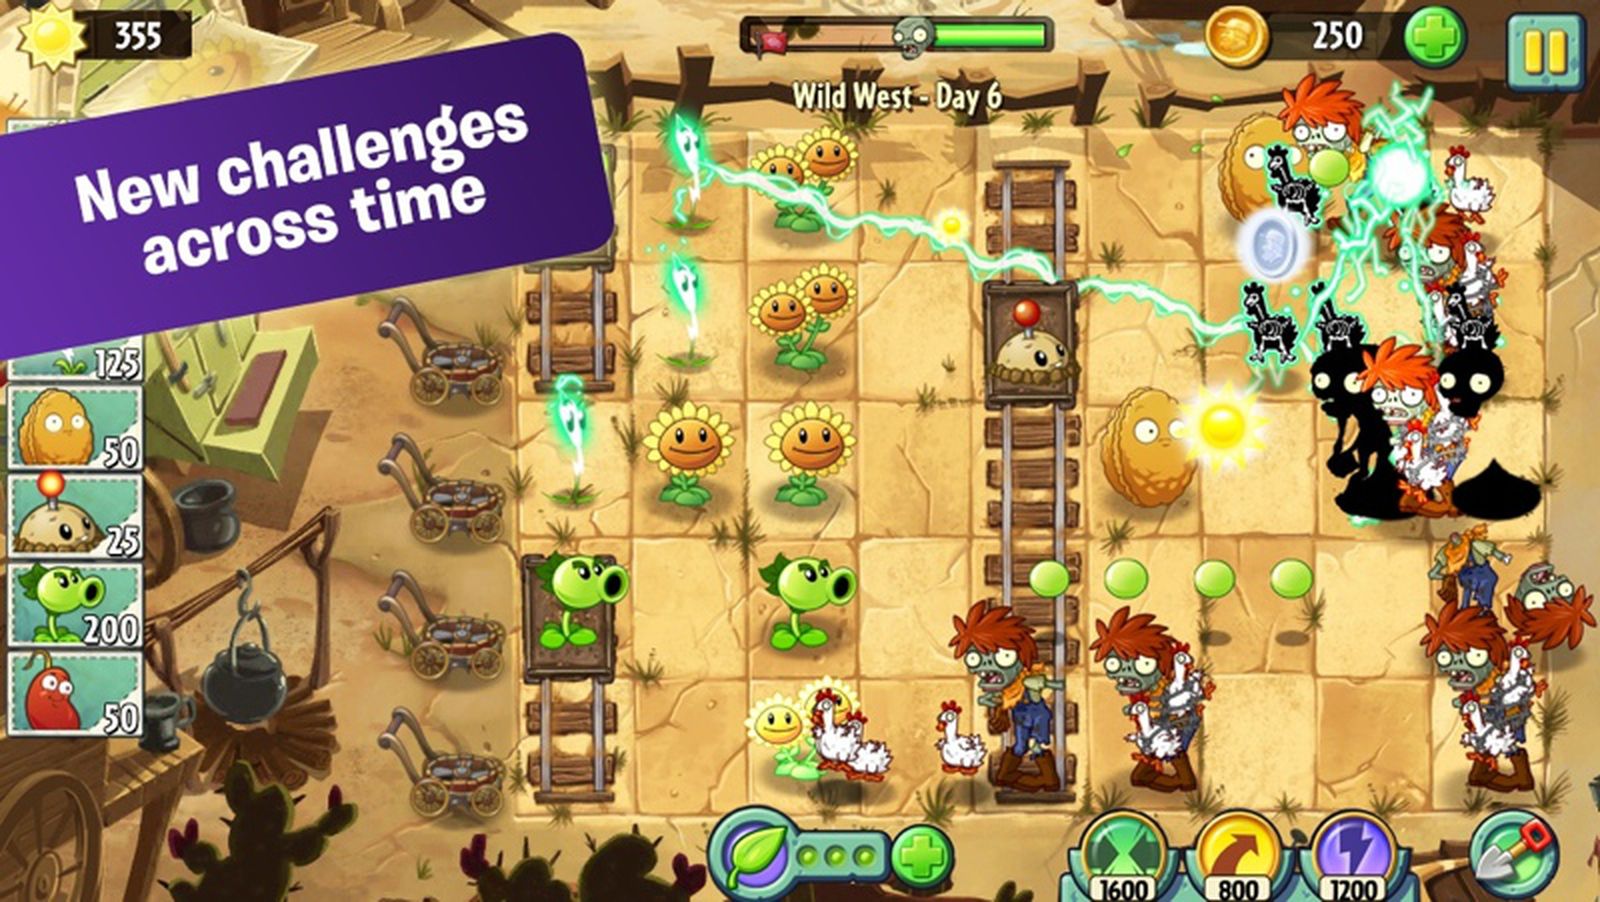 Plants Vs Zombies 2 sees soft Android launch in Australia & New Zealand